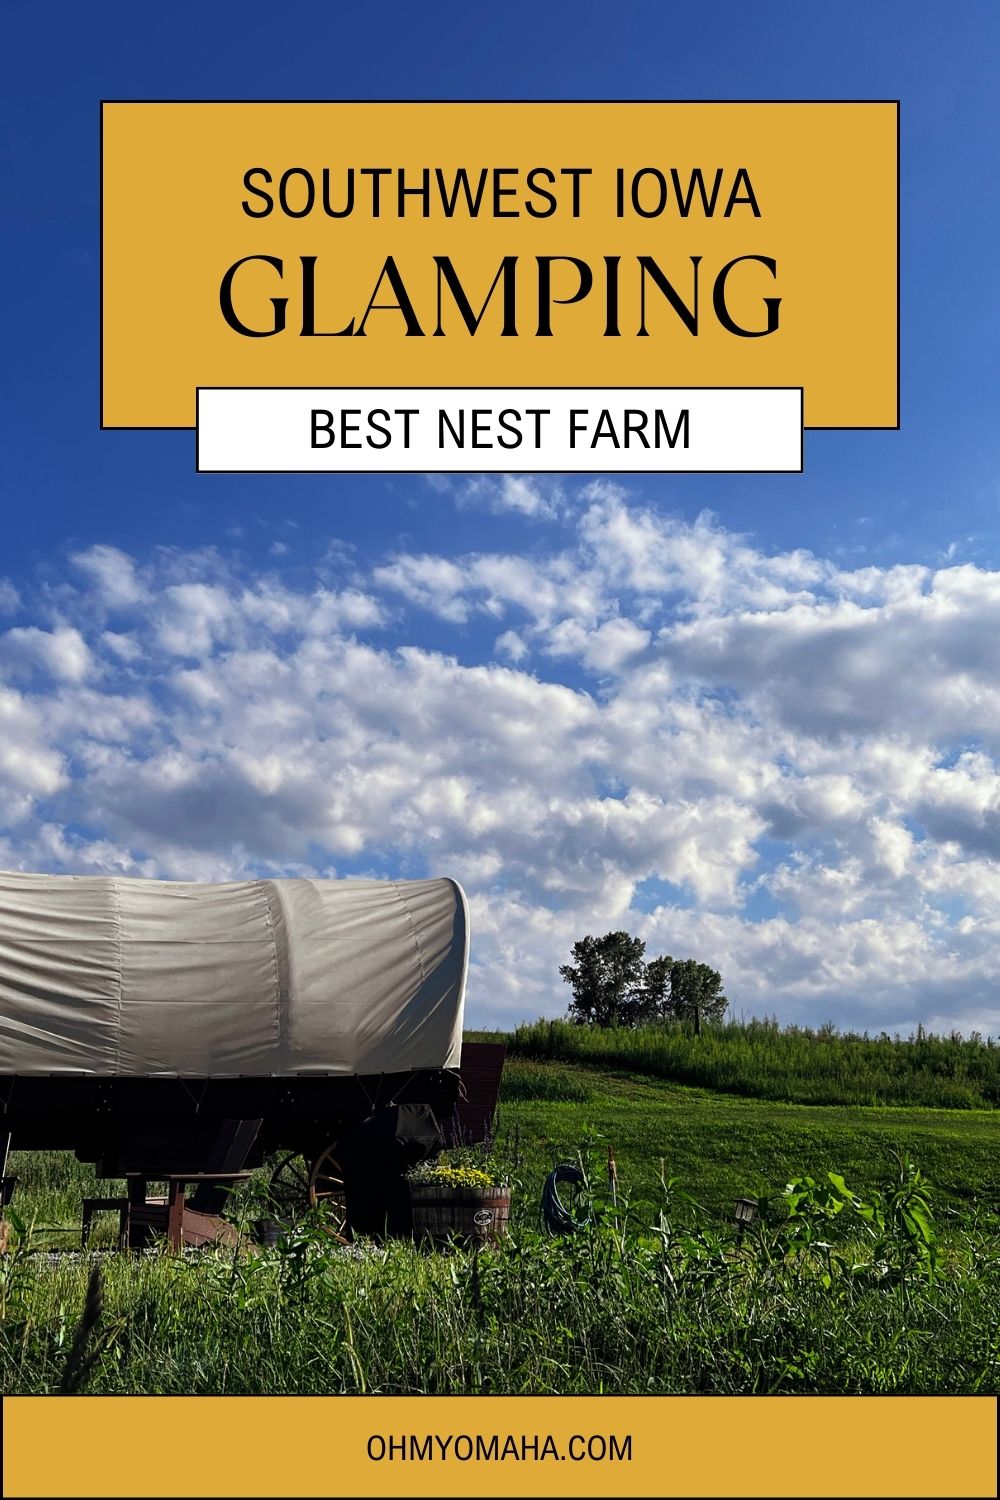 Best Nest Farm has luxury covered wagons - it's a unique glamping experience! Here's what to expect when you stay on this farm in southwest Iowa.